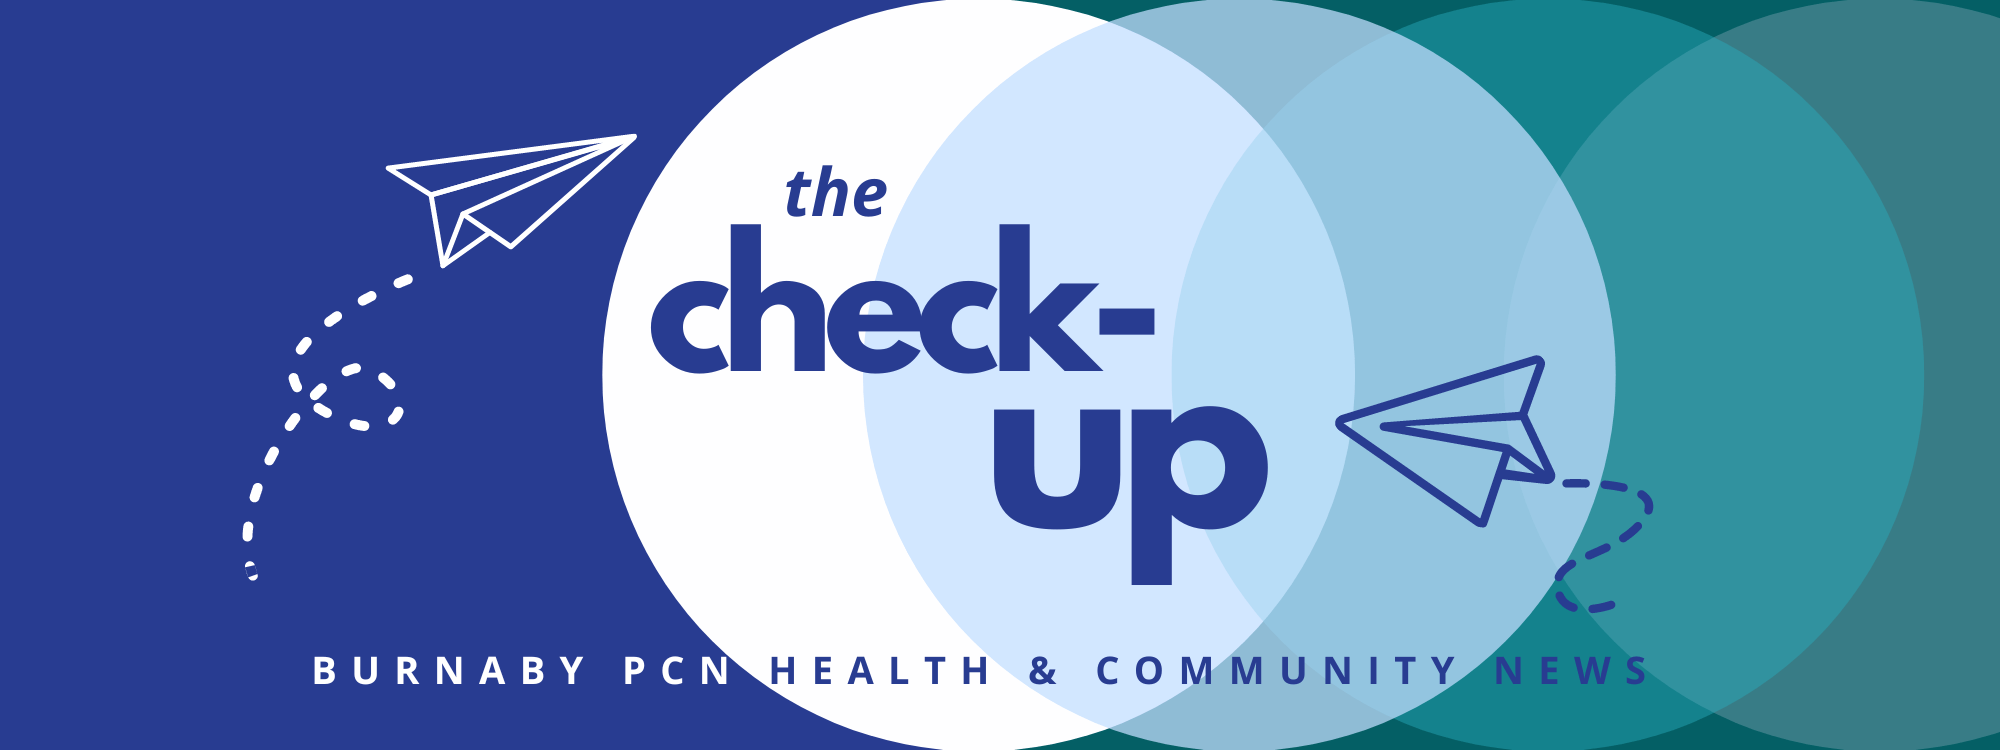 Subscribe to The Check-up! Burnaby PCN Health & Community News